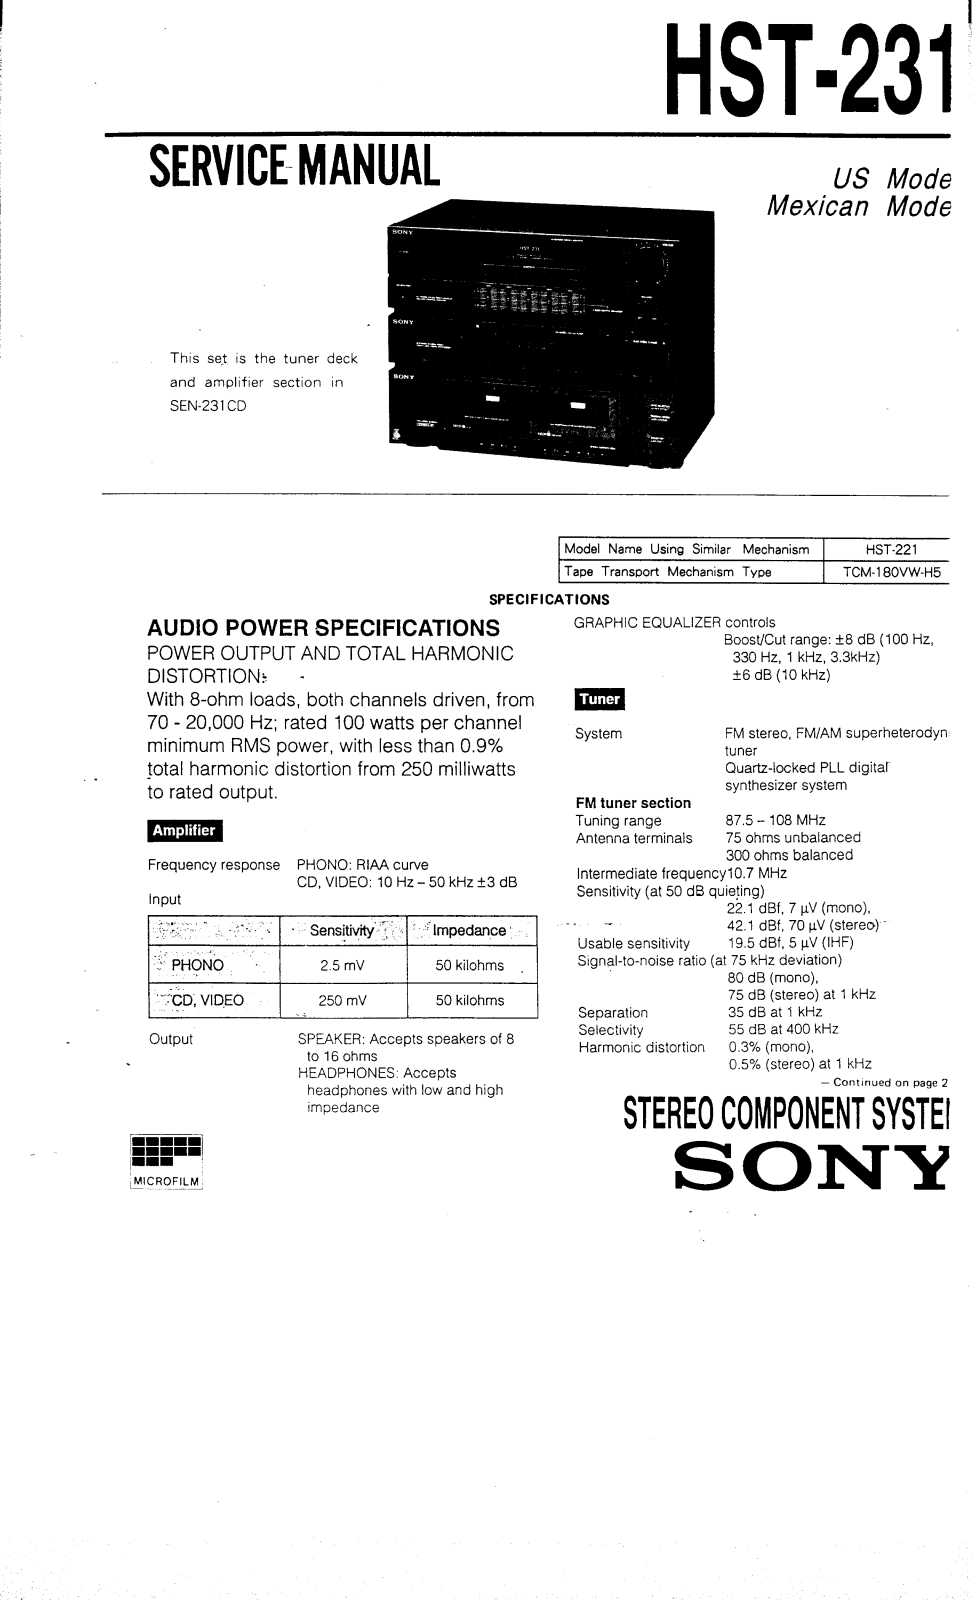 Sony HST231 OPERATING MANUAL